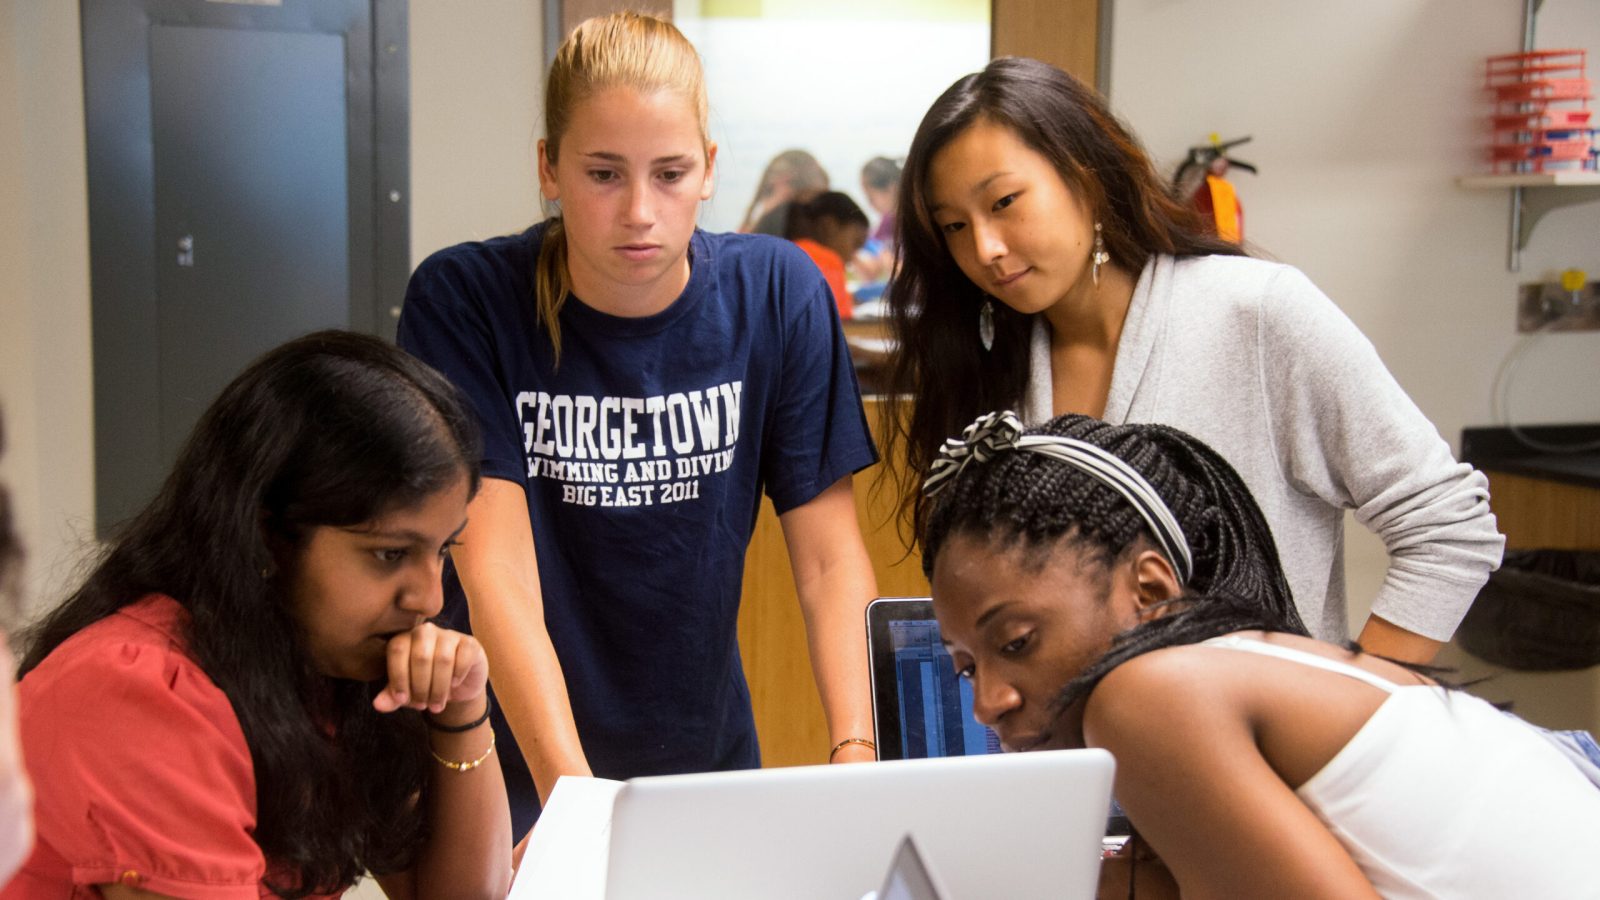 A group of four students look at a laptop screen together in a classroom setting.